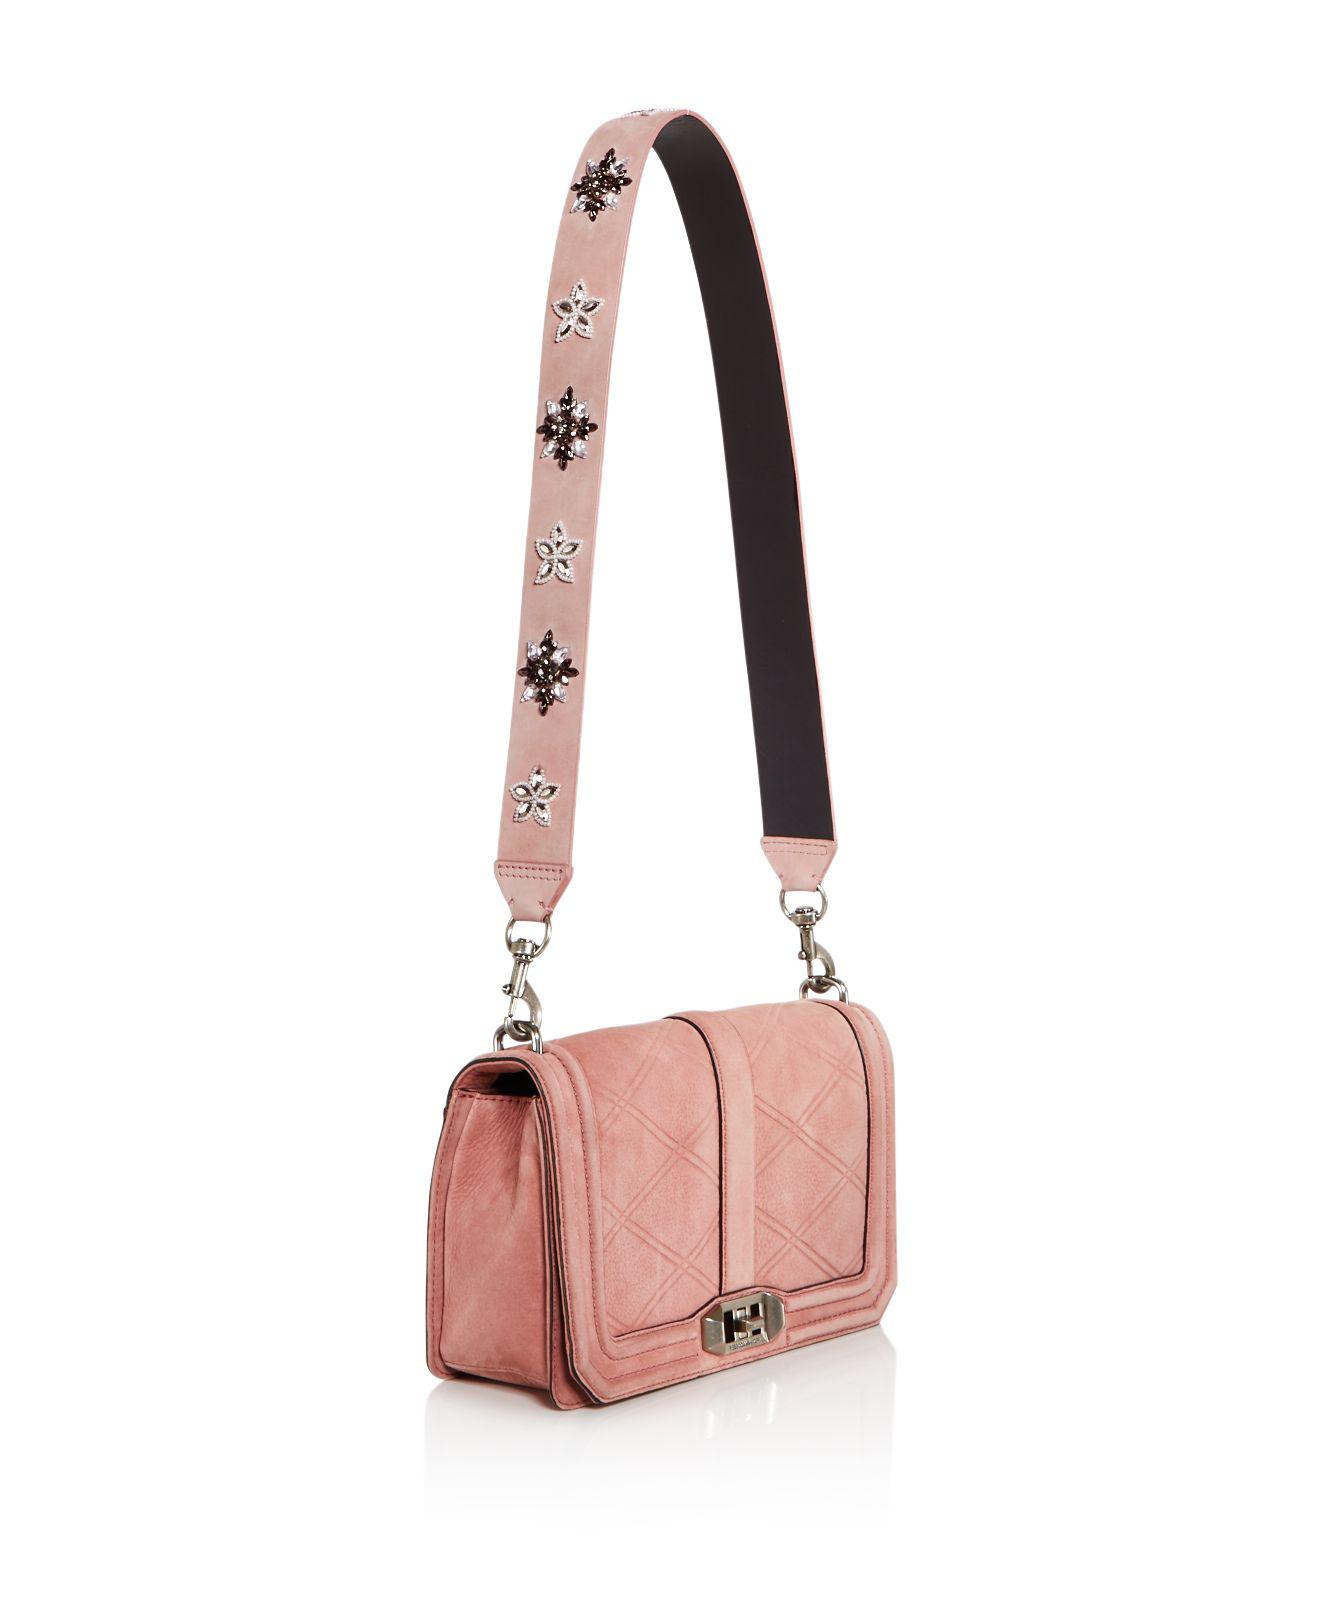 Crossbody Bag With Thick Strap | City of Kenmore, Washington